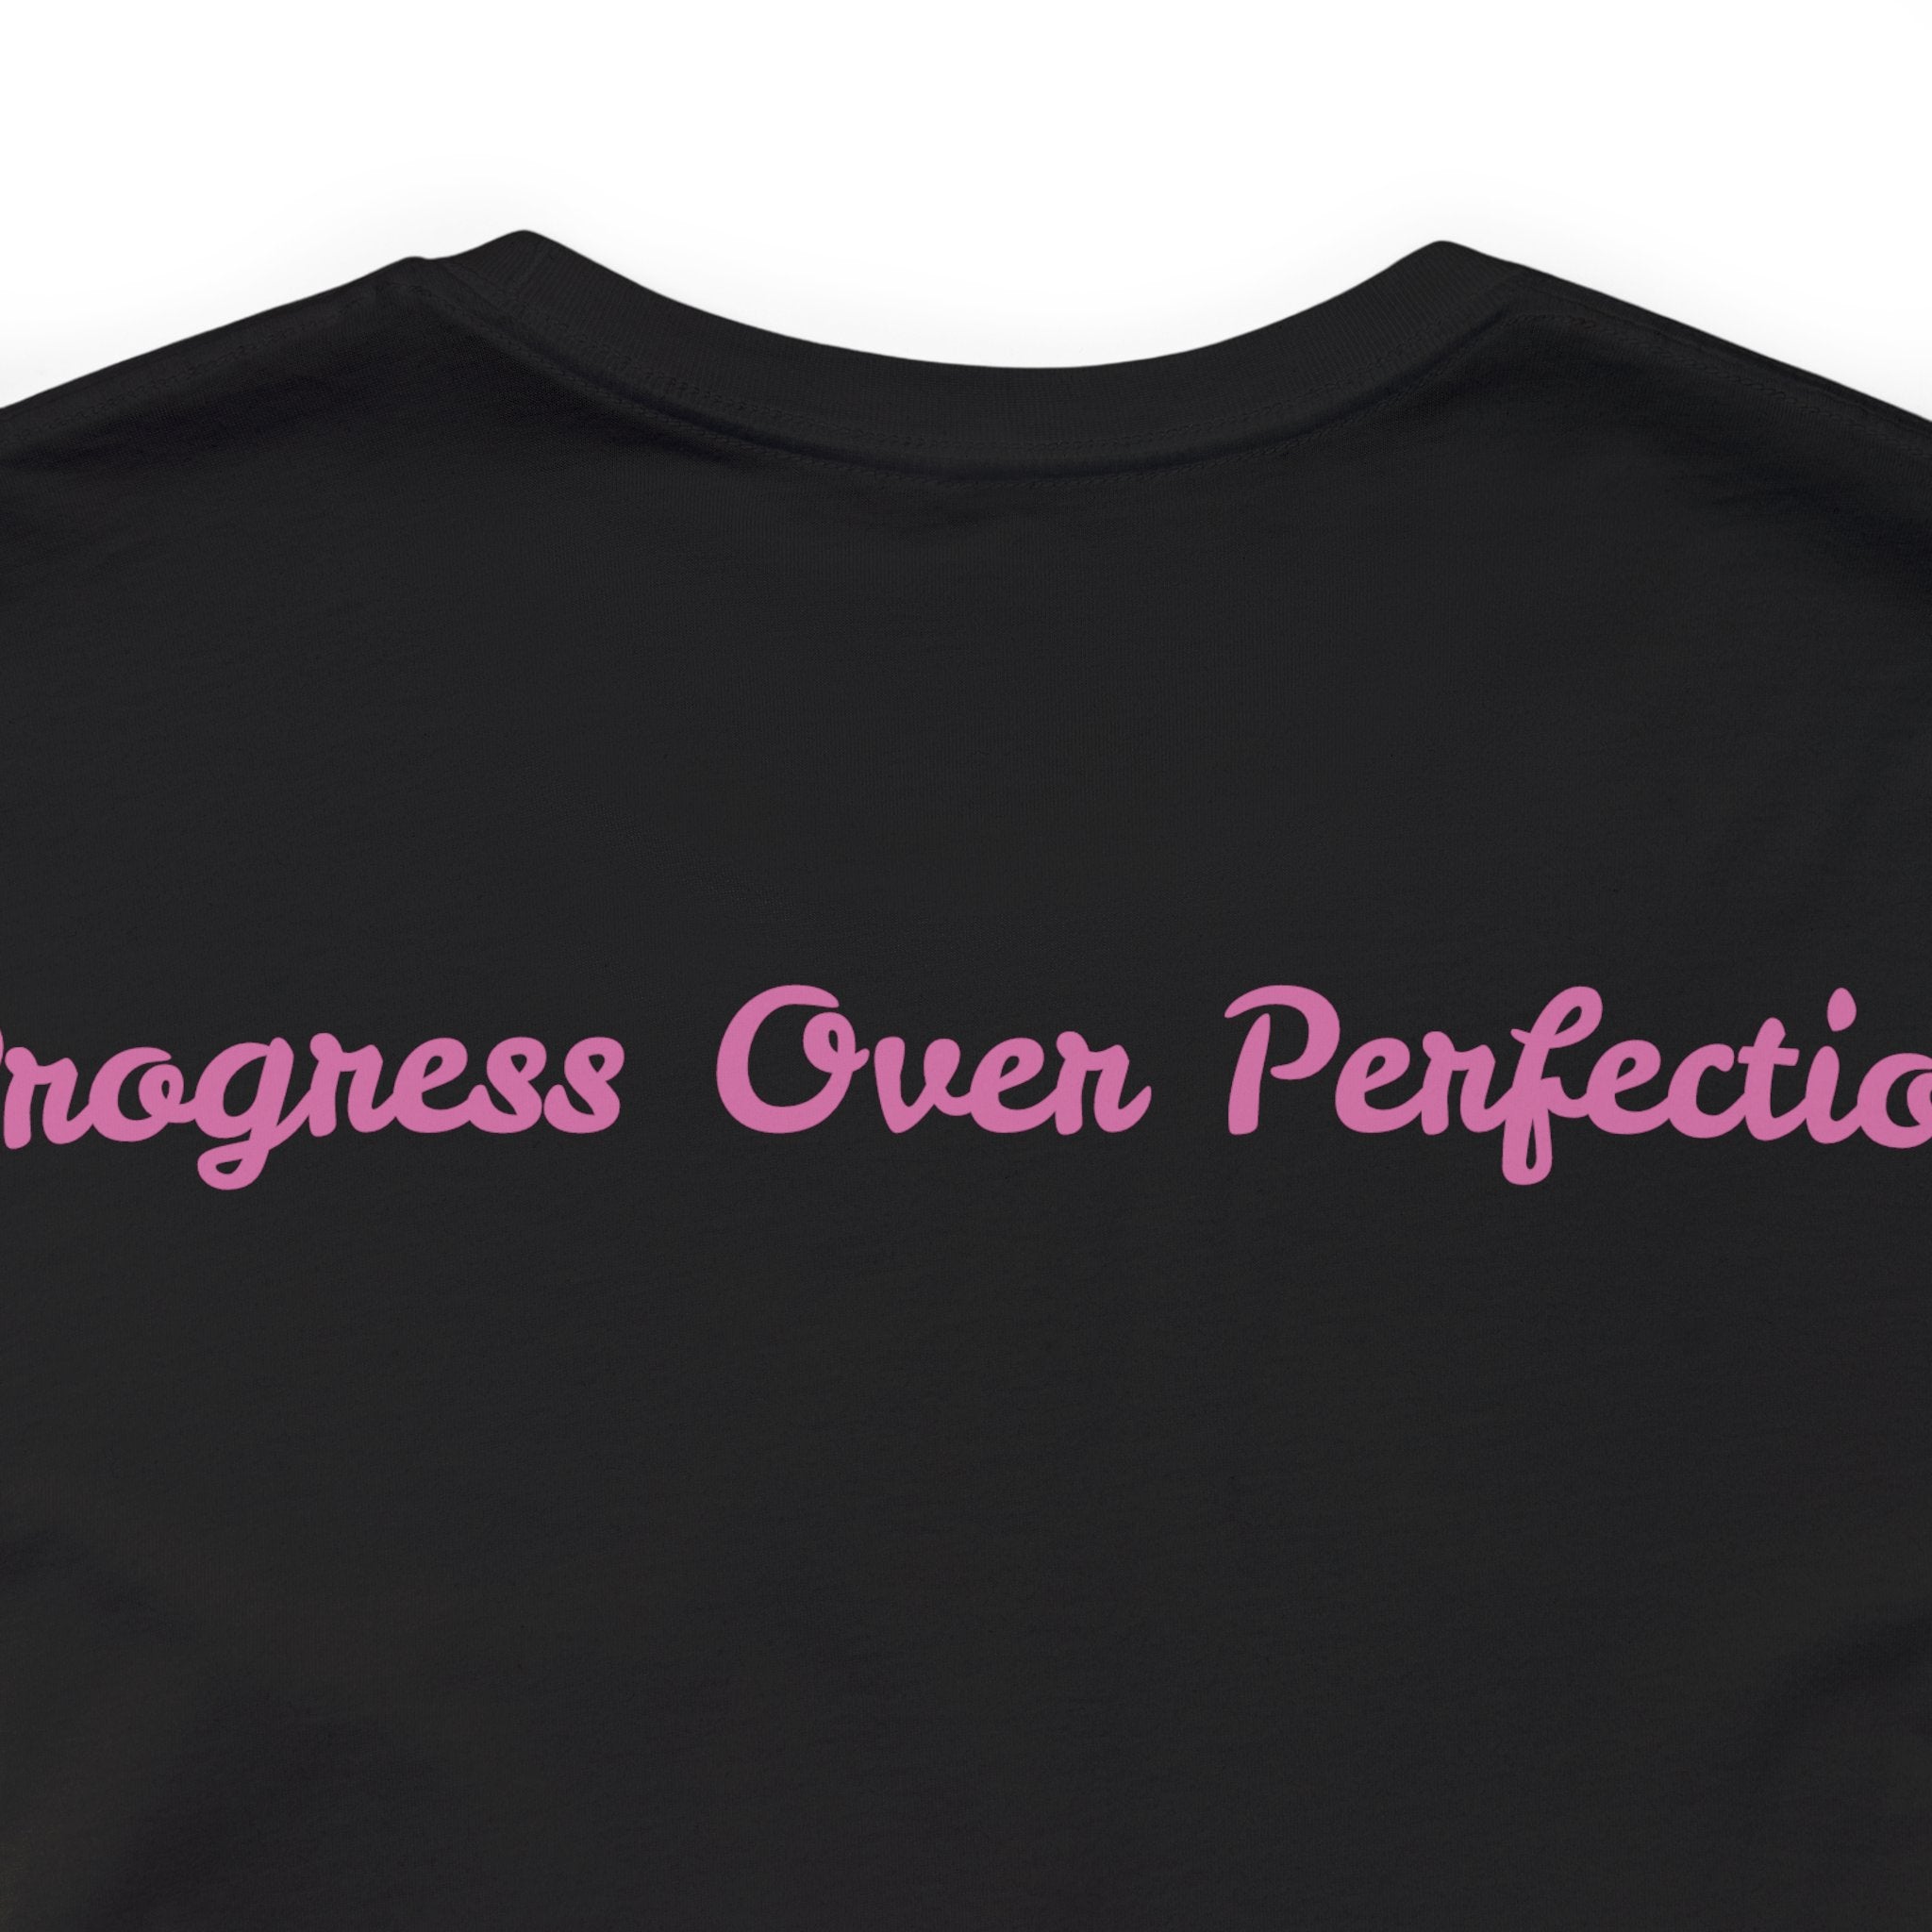 Progress Over Perfection Tee - Bella+Canvas 3001 Yellow Airlume Cotton Bella+Canvas 3001 Crew Neckline Jersey Short Sleeve Lightweight Fabric Mental Health Support Retail Fit Tear-away Label Tee Unisex Tee T-Shirt 7480506281911724980_2048 Printify